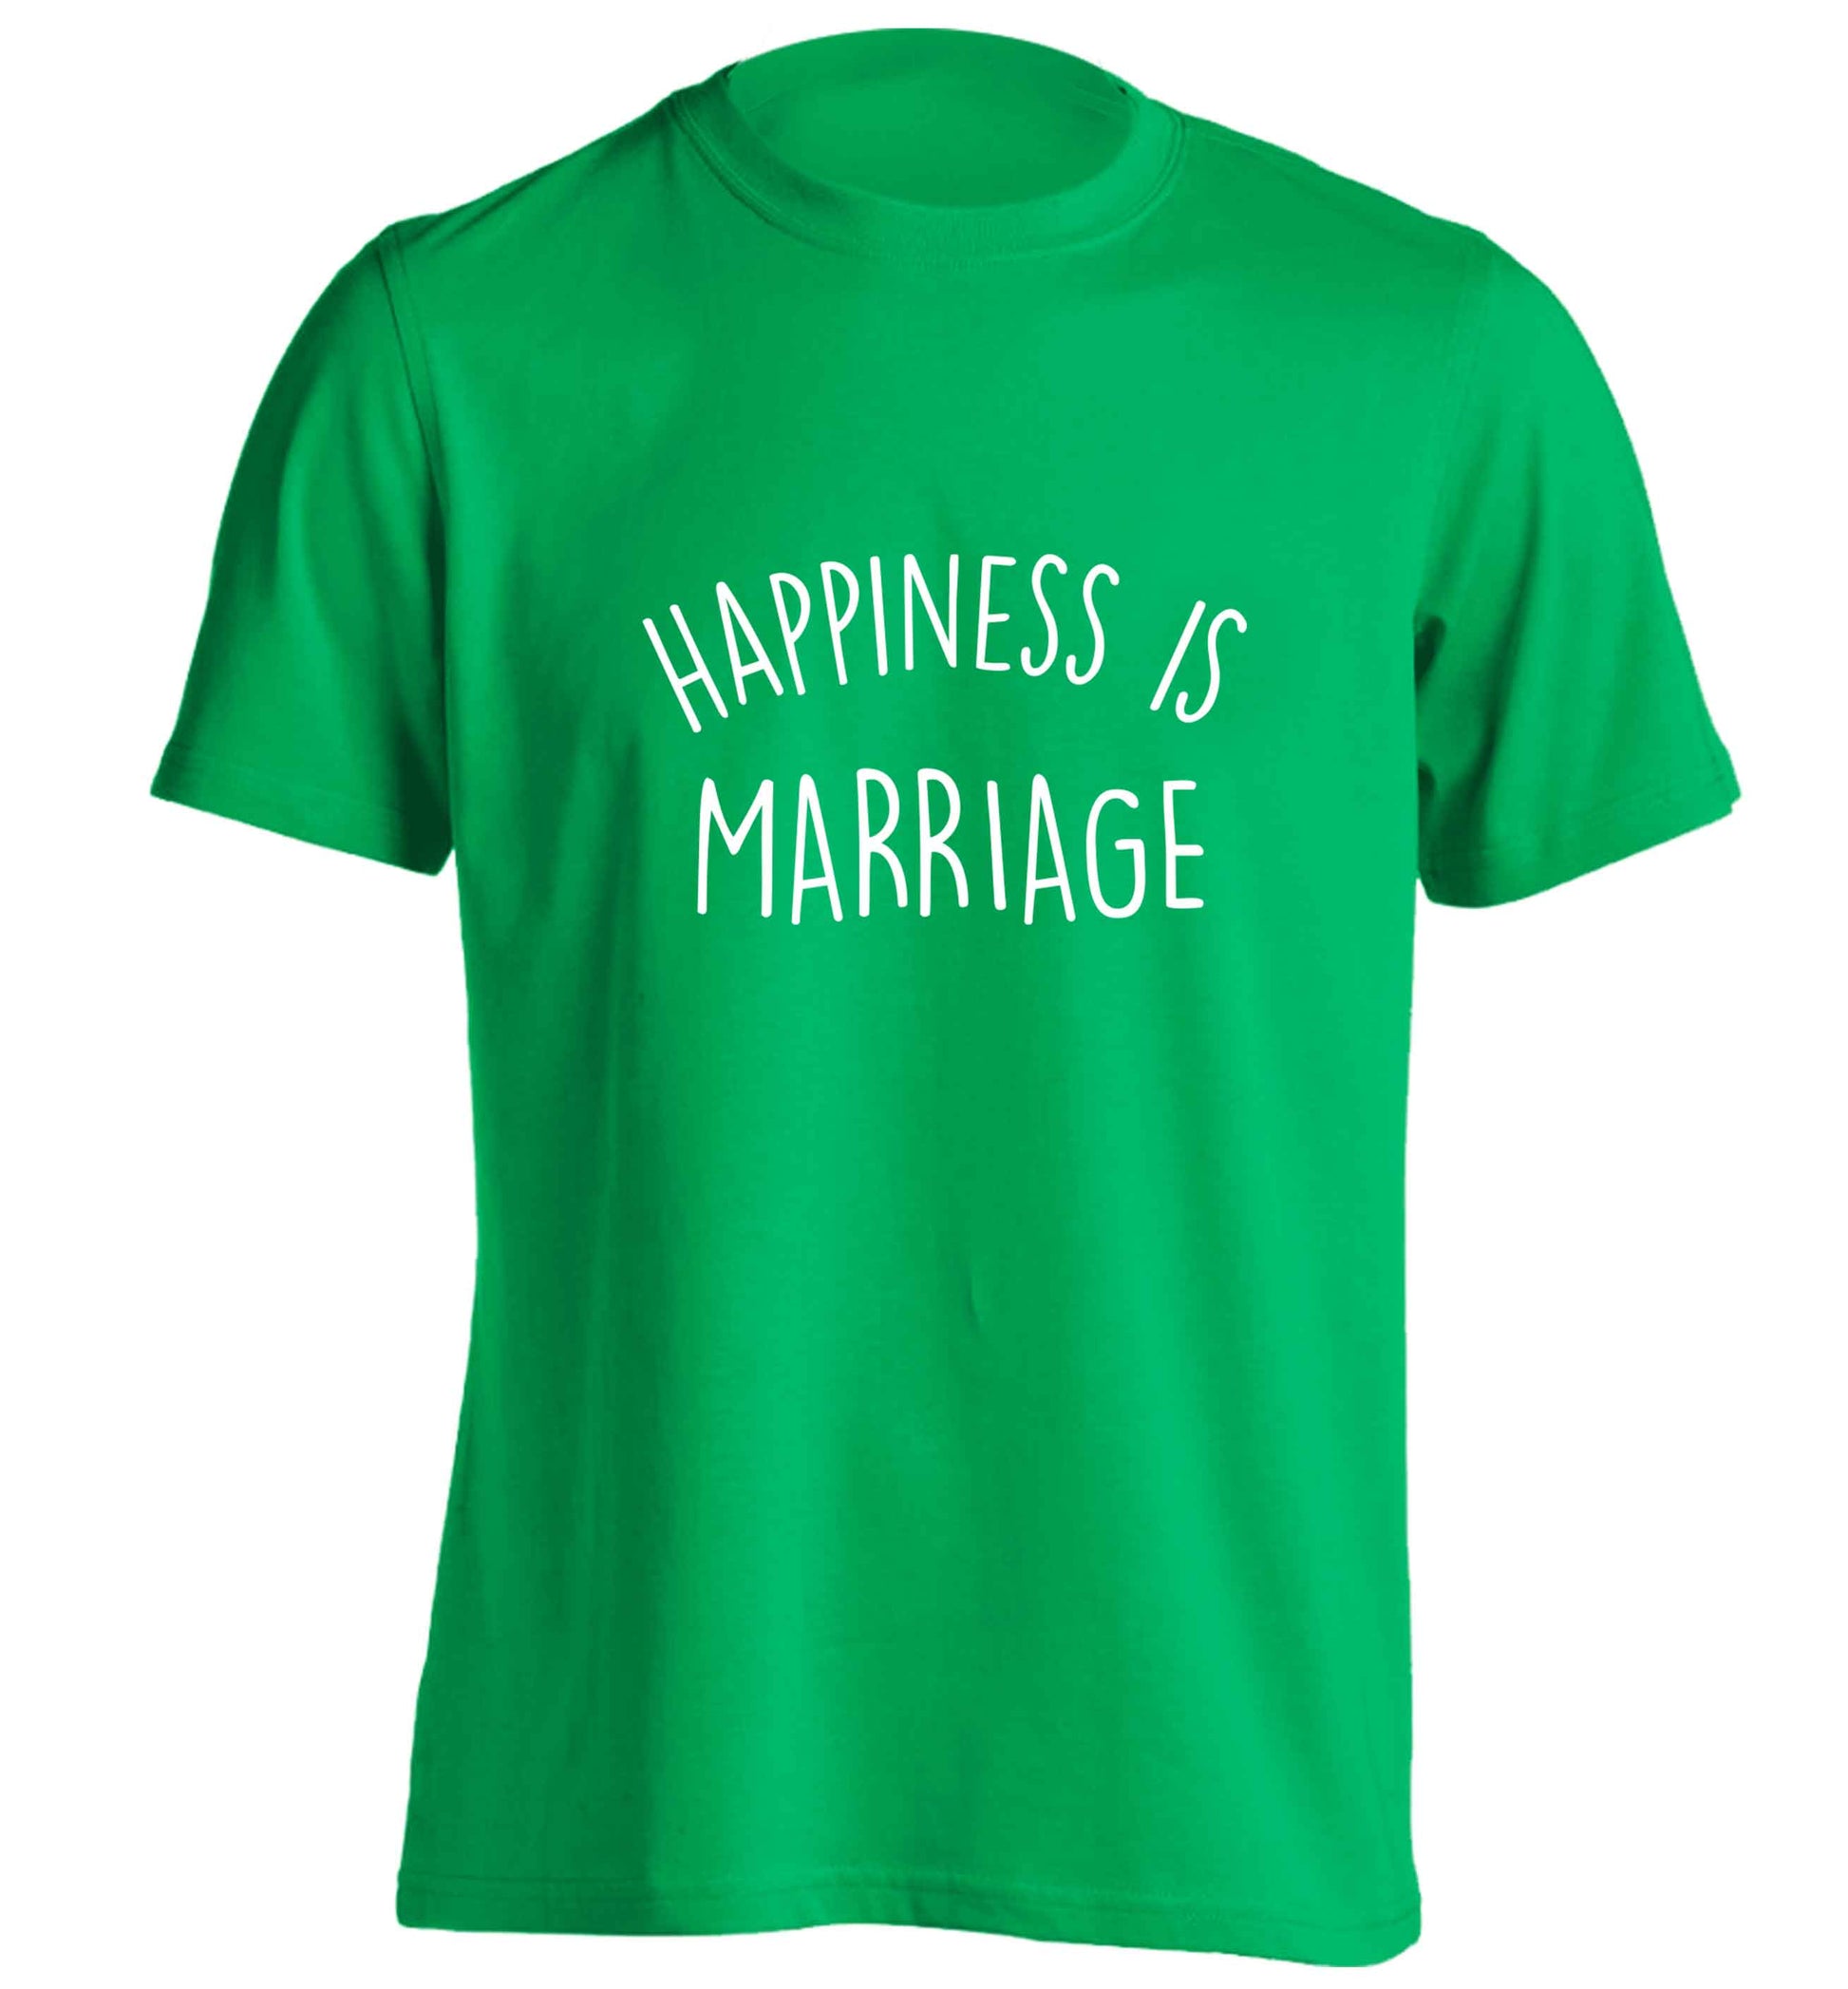 Happiness is marriage adults unisex green Tshirt 2XL